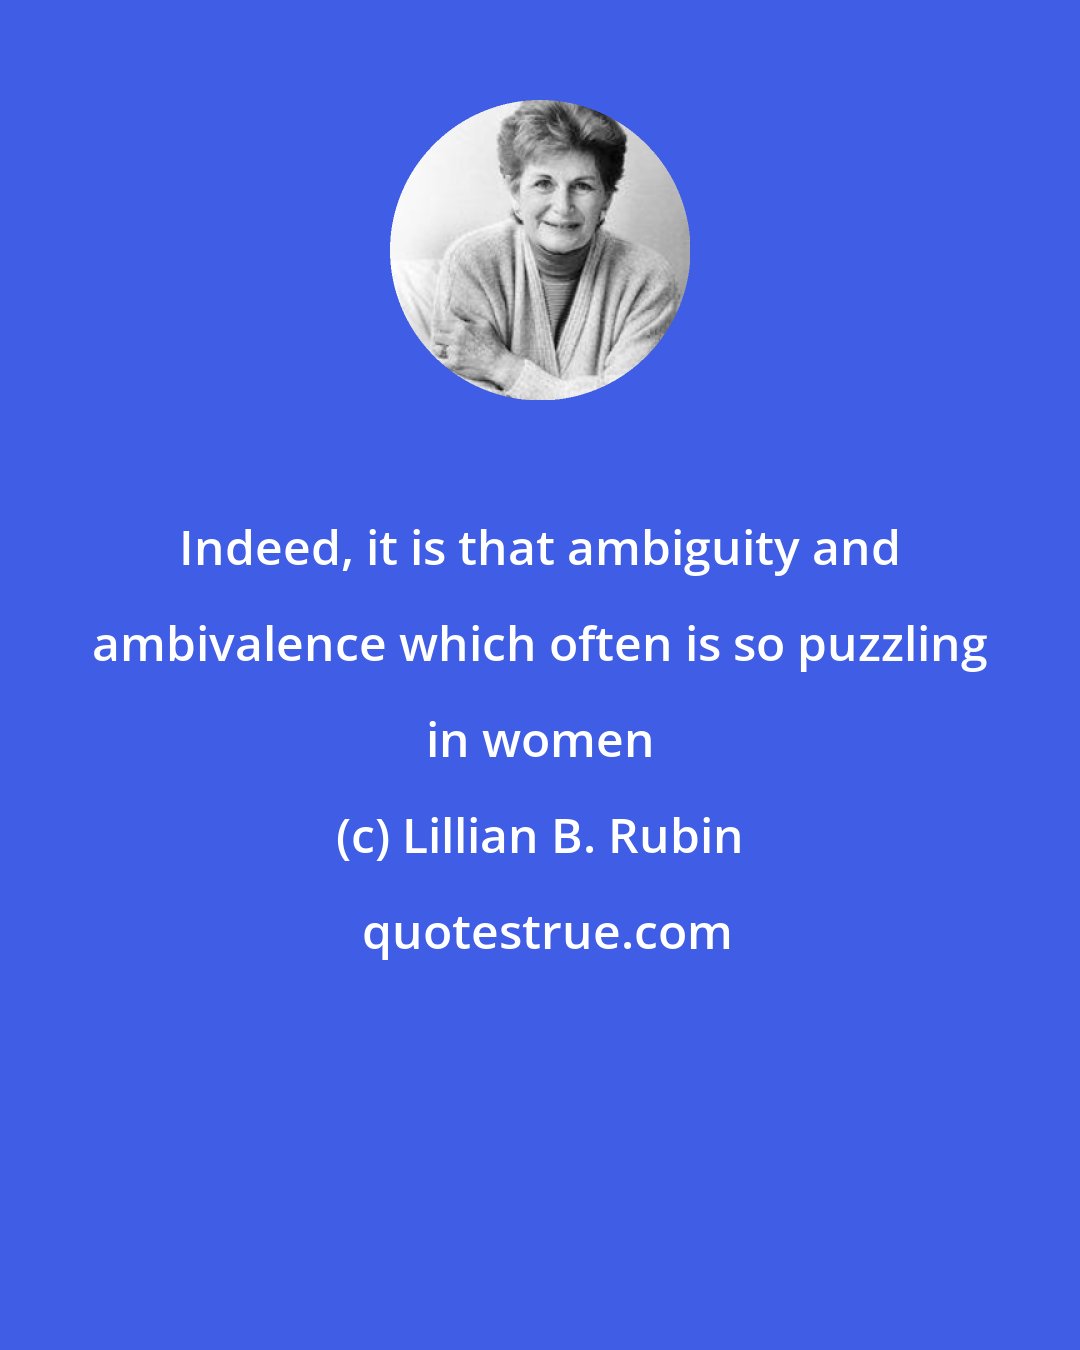 Lillian B. Rubin: Indeed, it is that ambiguity and ambivalence which often is so puzzling in women